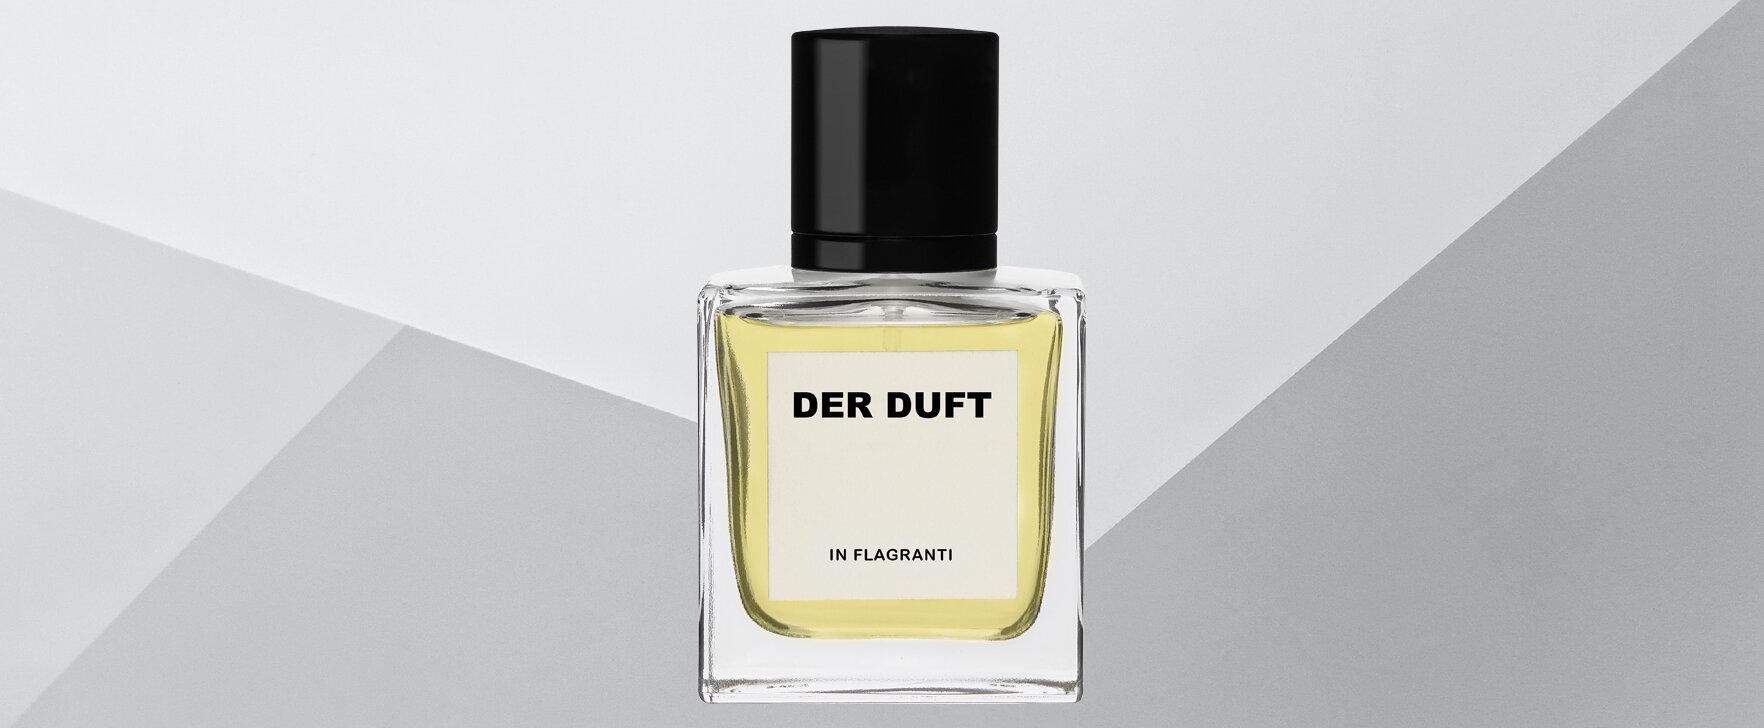 "In Flagranti": The New Floral-Sweet Unisex Creation by "Der Duft"